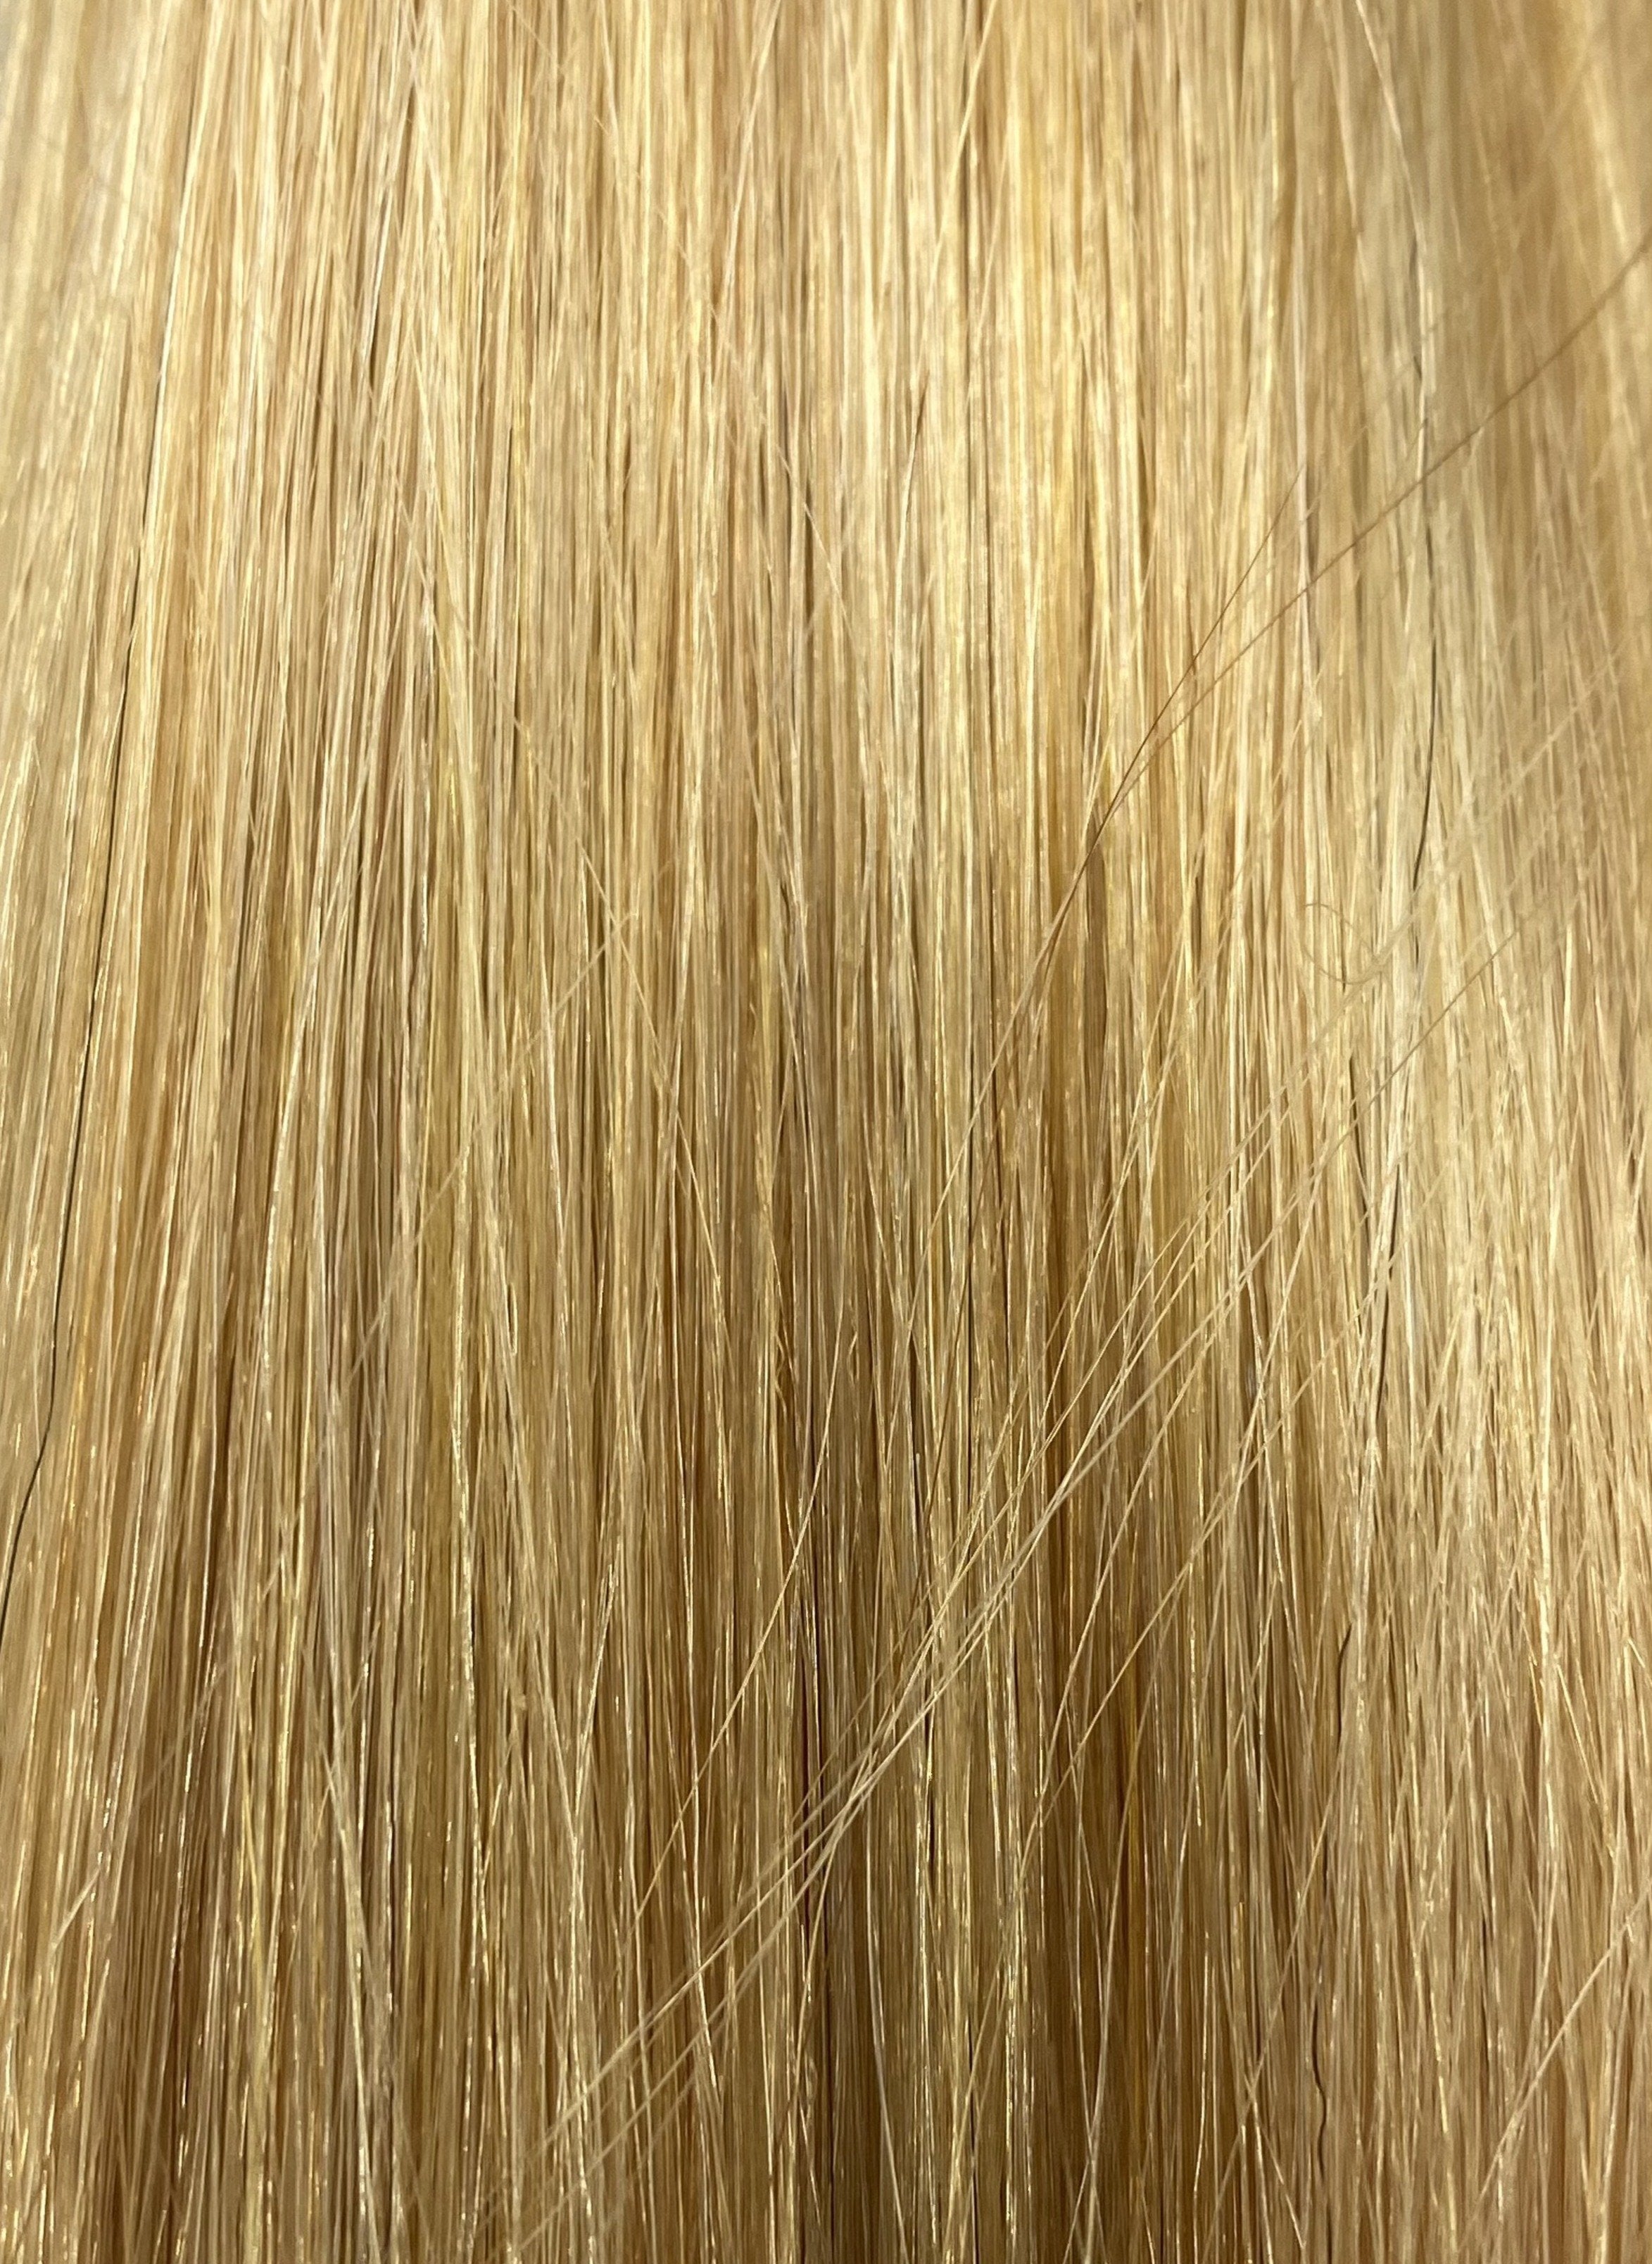 FUSION HIGHLIGHT #140 GOLDEN ULTRA BLONDE 50CM/ 20 INCHES  -  20 GRAMS - Image 1